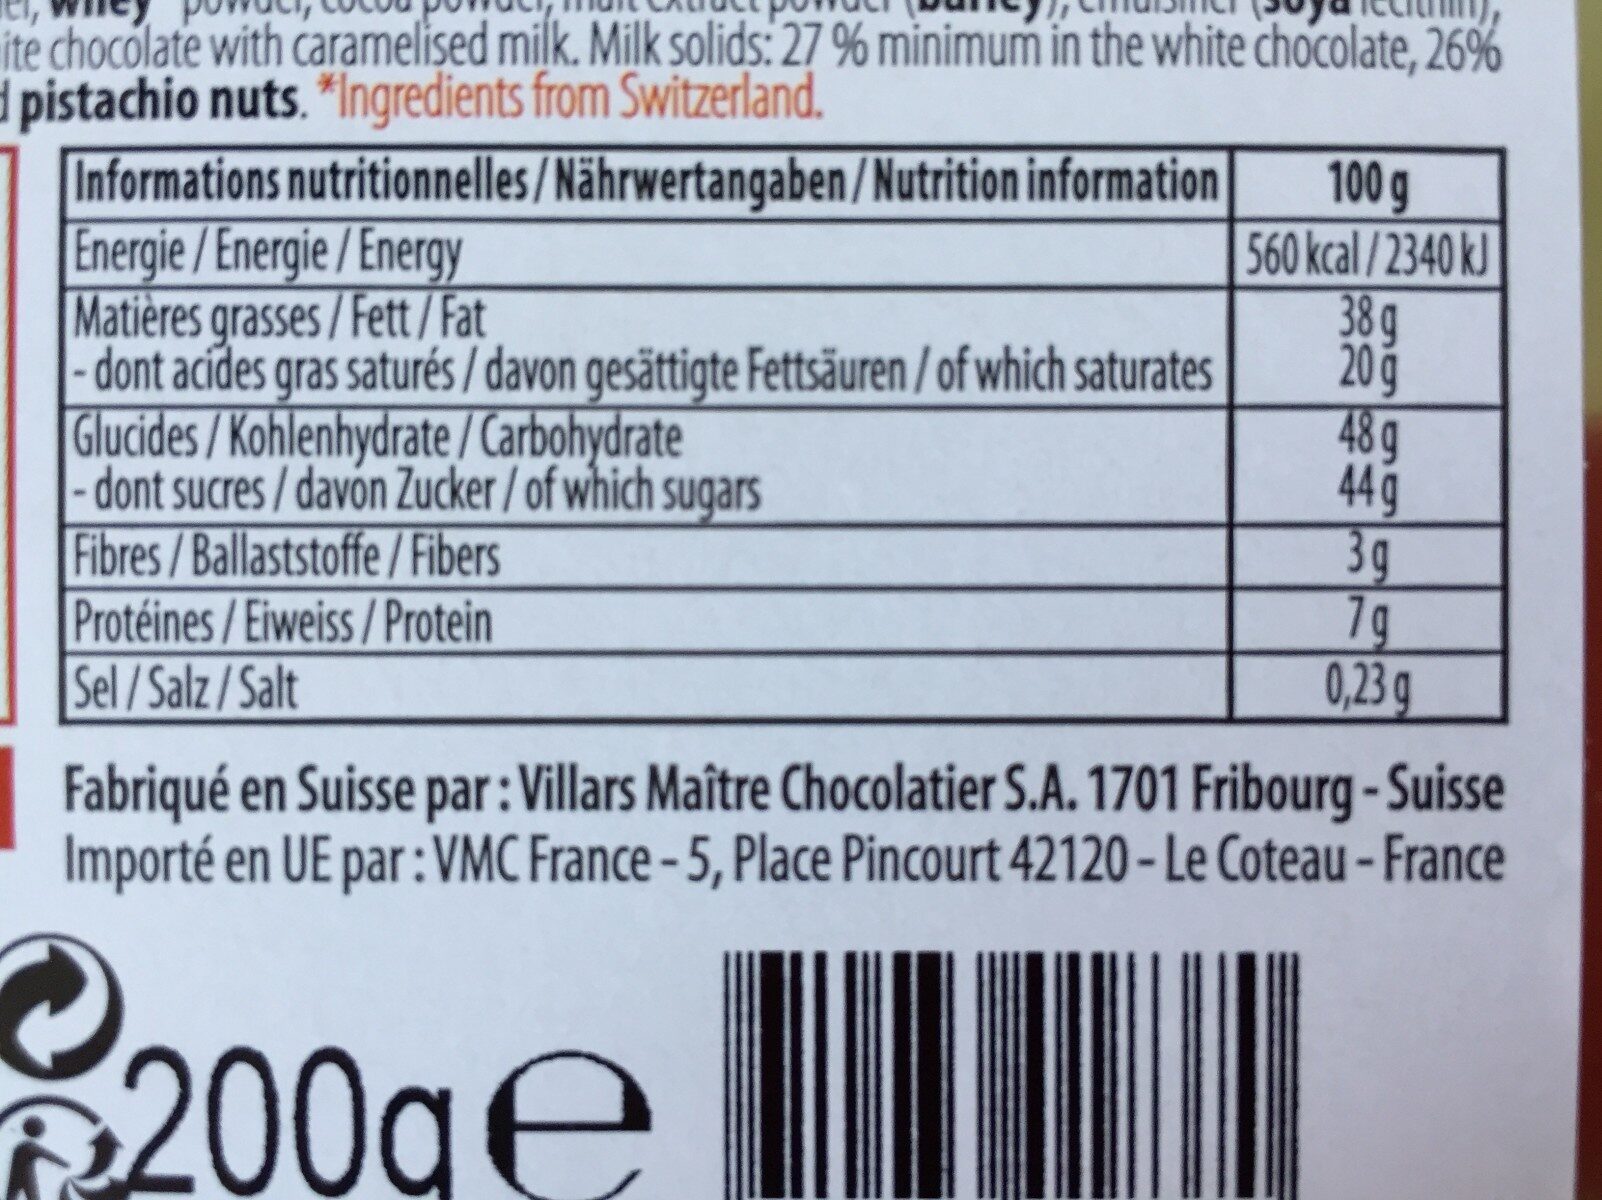 Chocolat suisse - Nutrition facts - fr